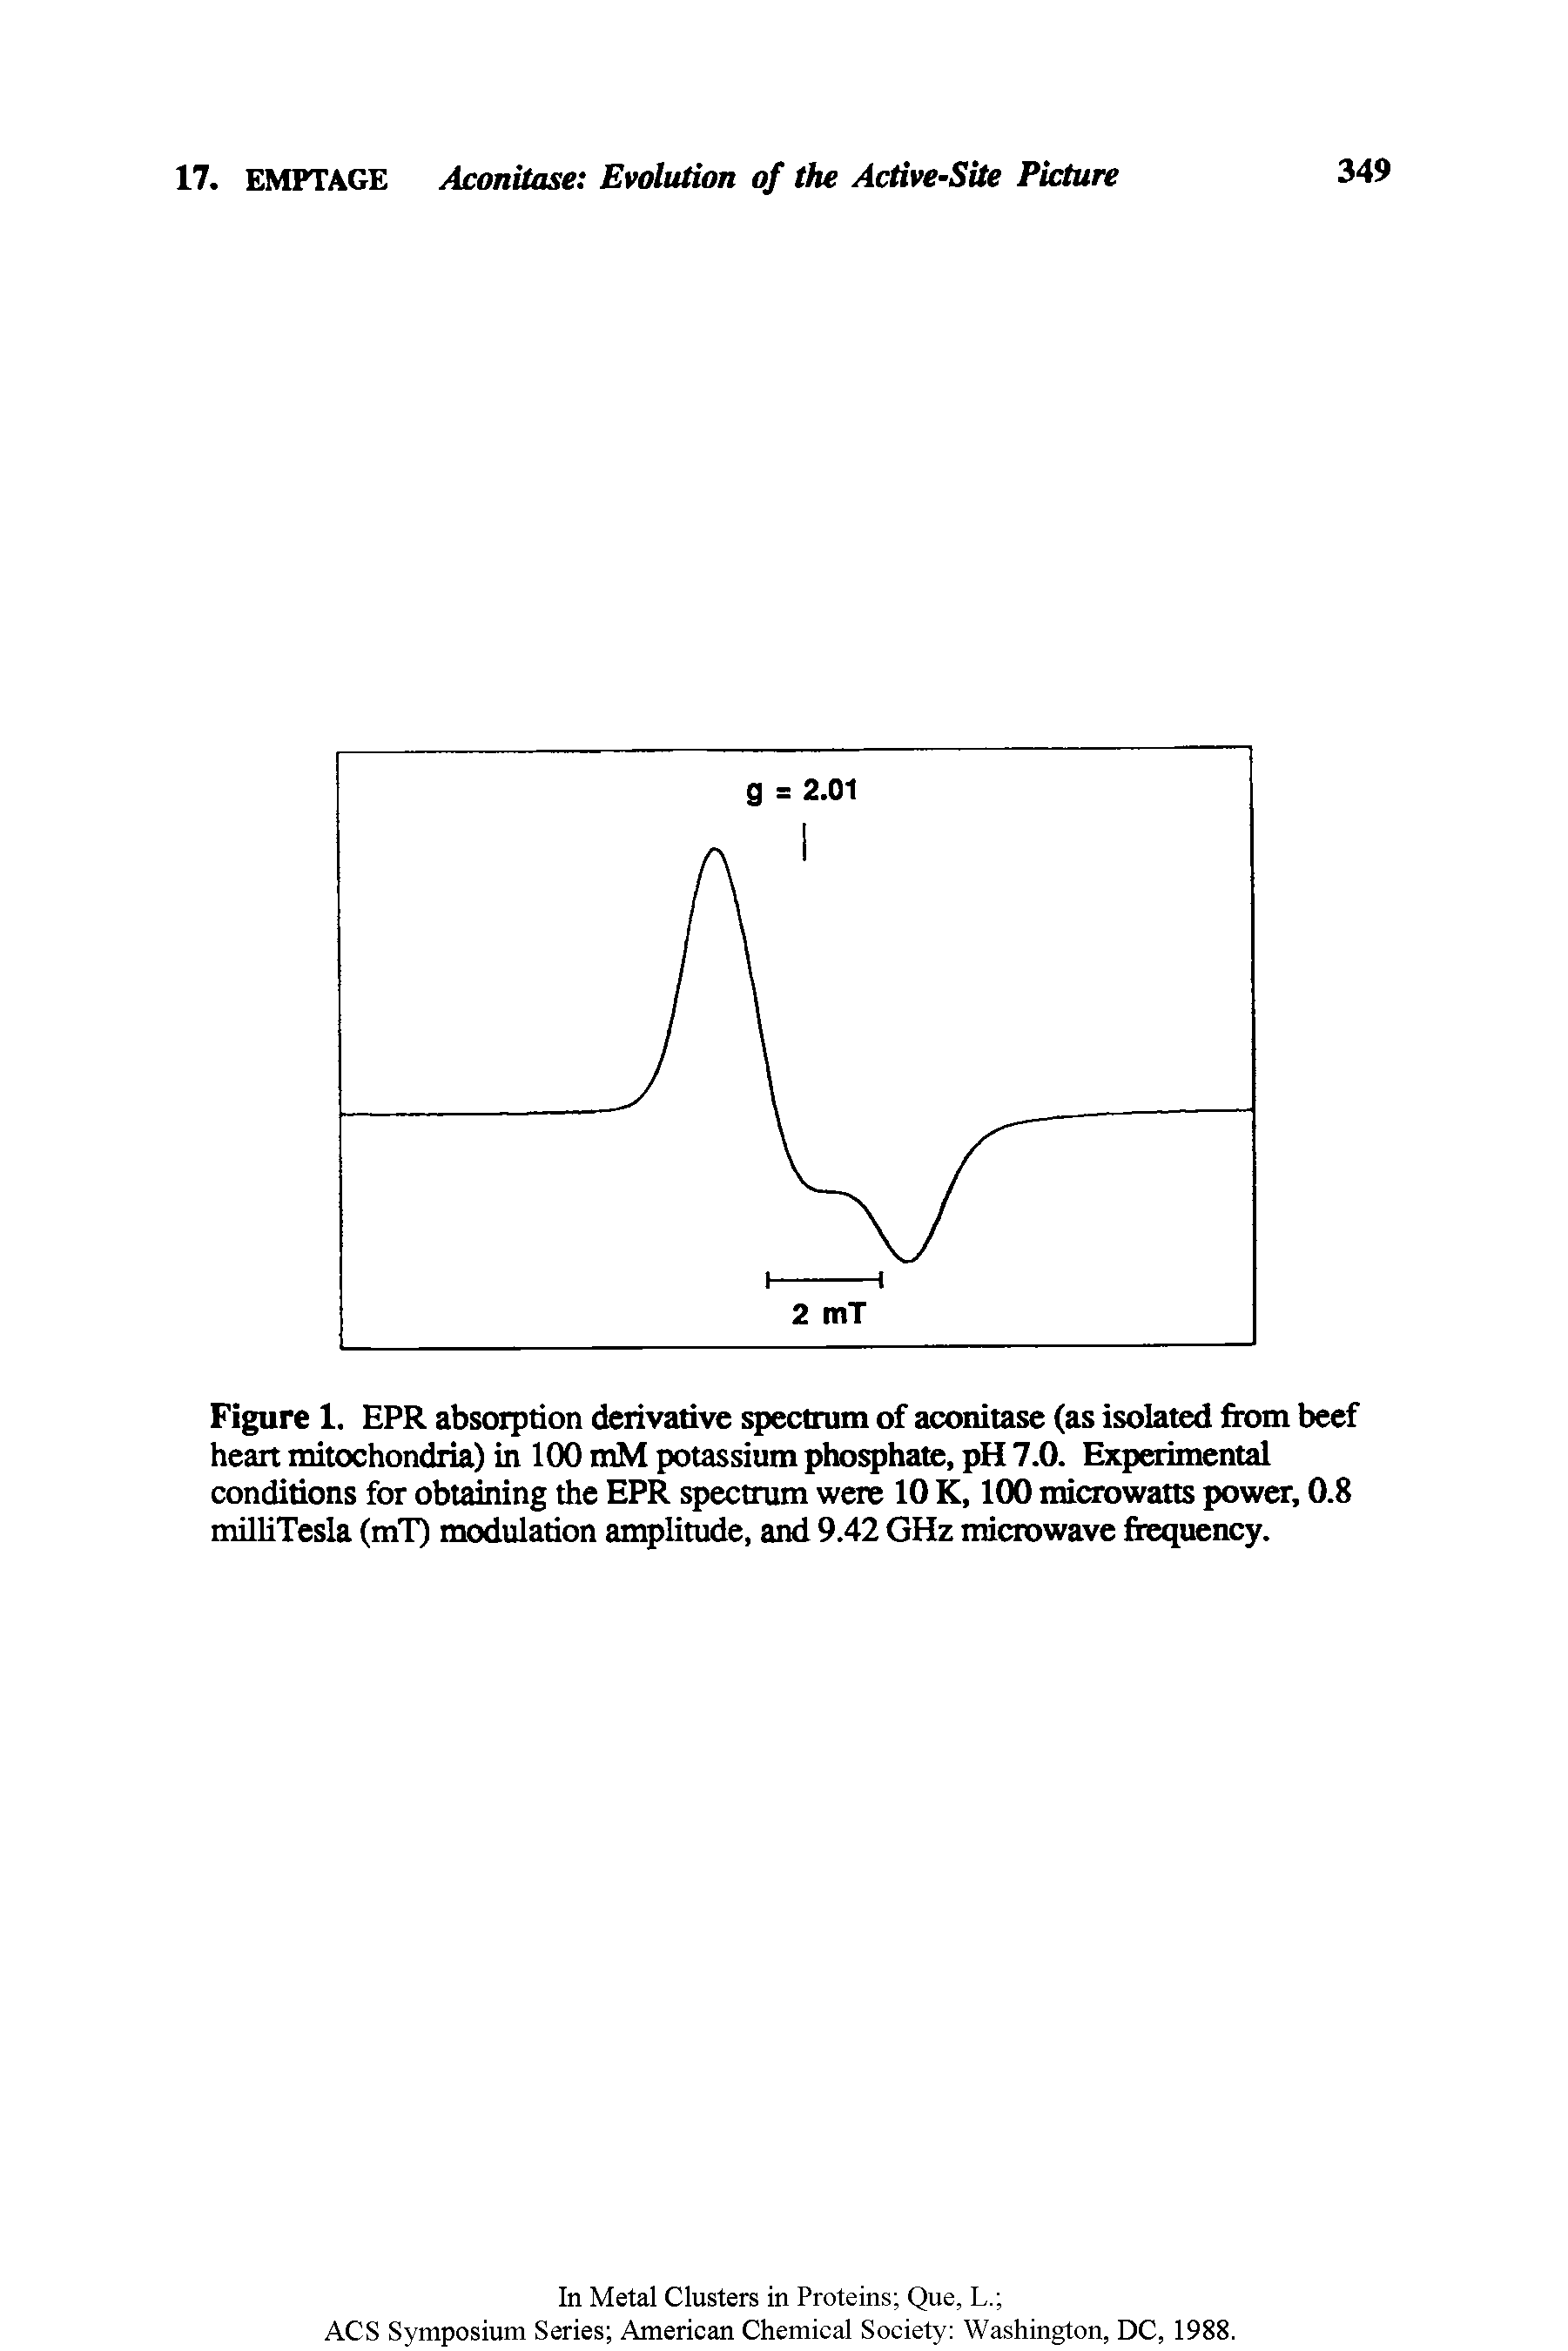 Figure 1. EPR absorption derivative spectrum of aconitase (as isolated from beef heart mitochondria) in 100 mM potassium phosphate, pH 7.0. Experimental conditions for obtaining the EPR spectrum were 10 K, 100 microwatts power, 0.8 milliTesla (mT) modulation amplitude, and 9.42 GHz microwave frequency.